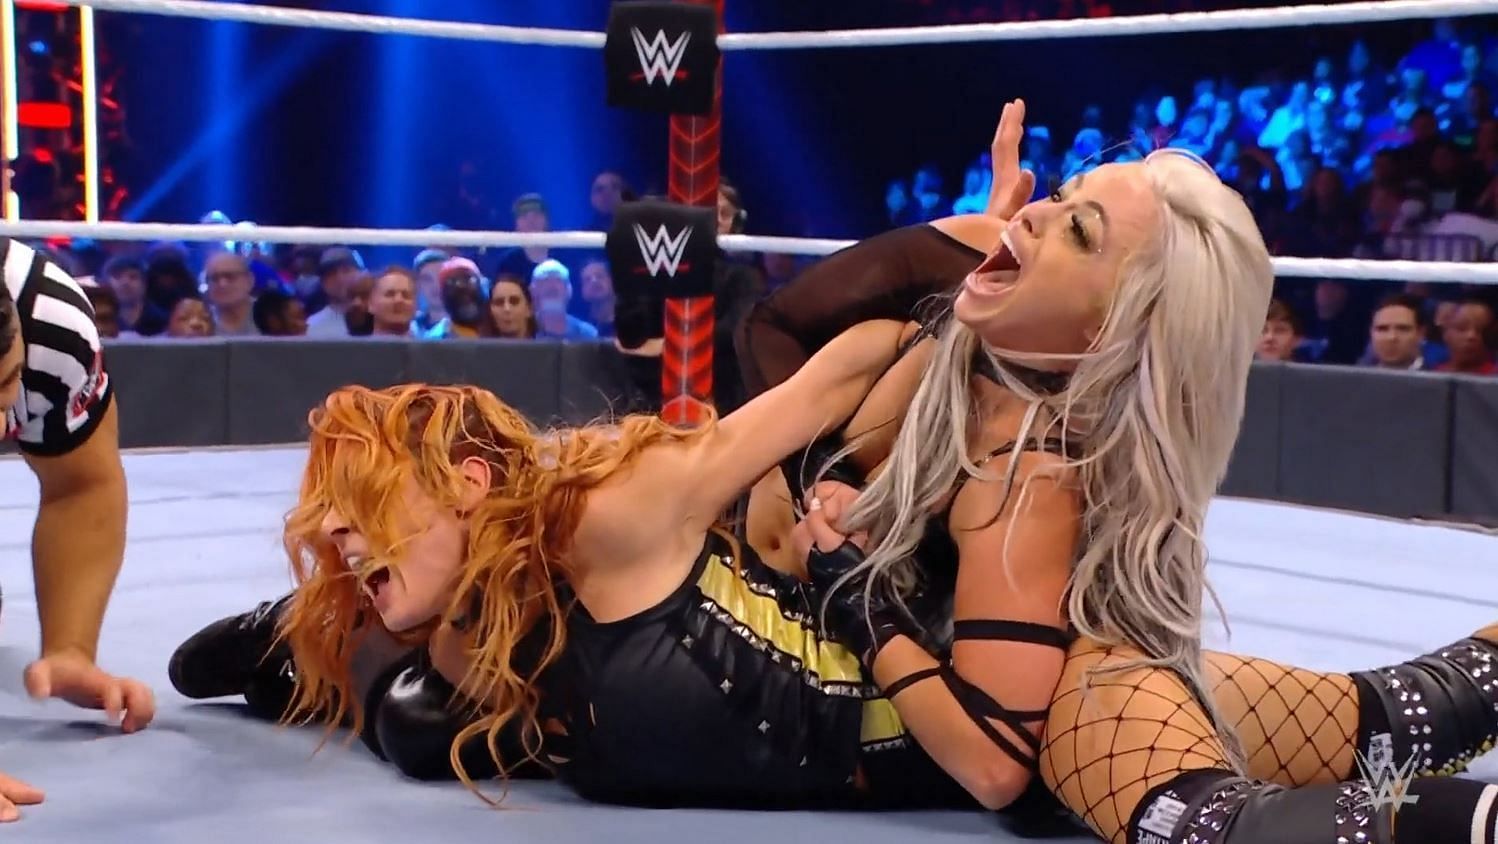 The wrestling world is watching the feud between Becky Lynch and Liv Morgan